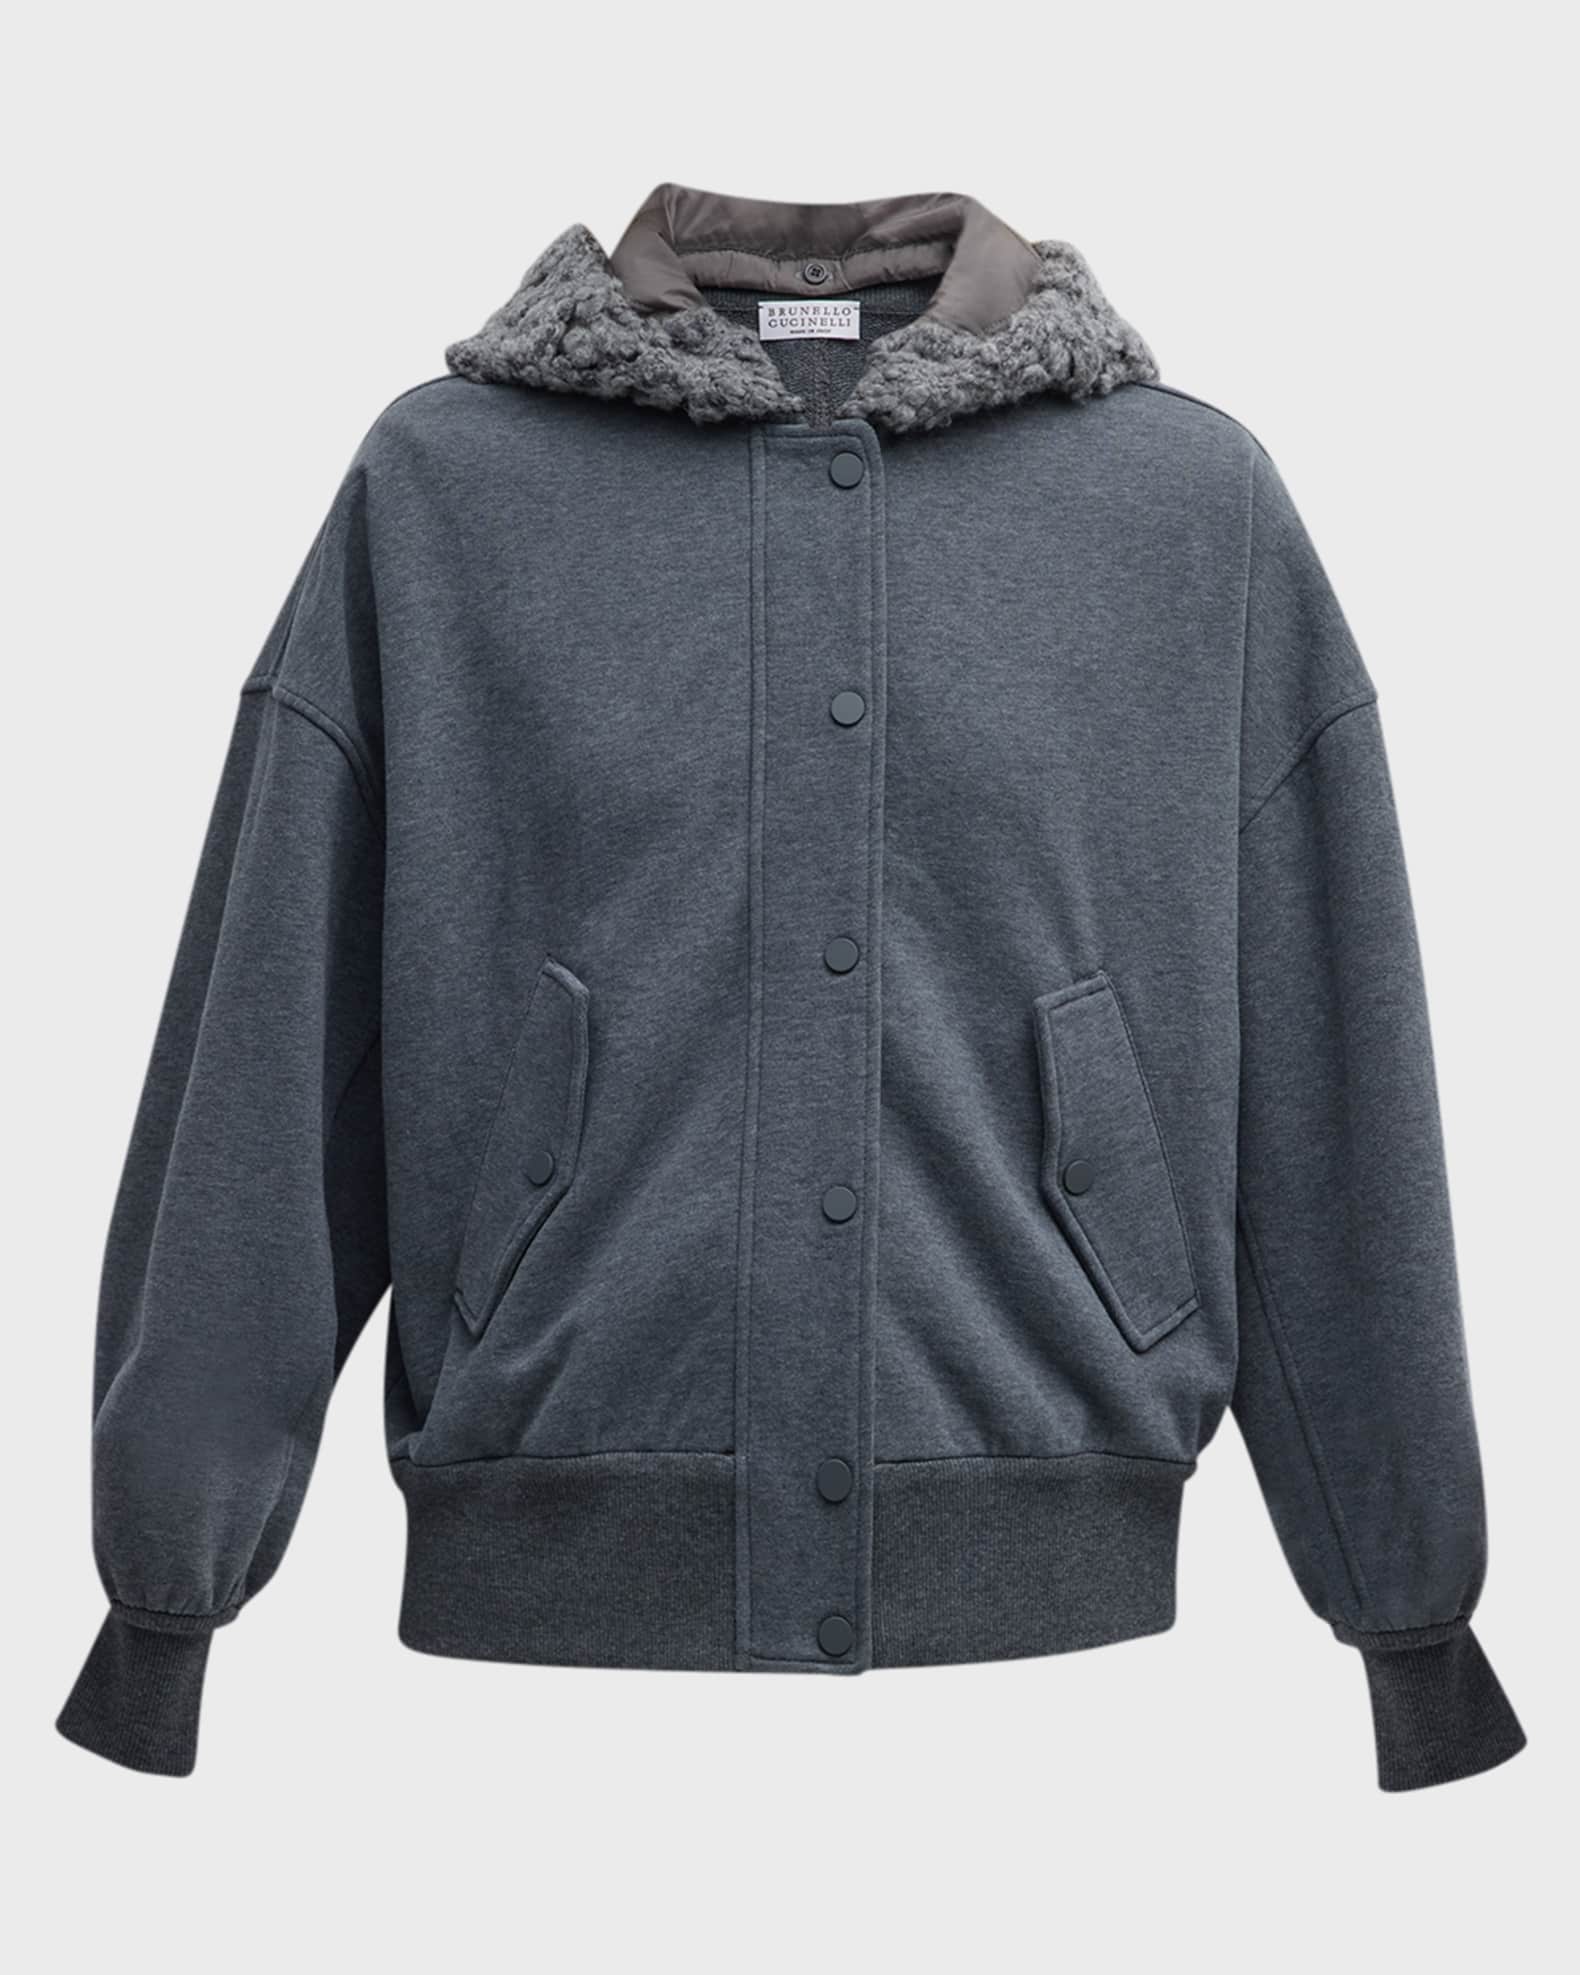 【CURLY&Co.】REVERSIBLE PADDED ZIP-UP BLOUSON